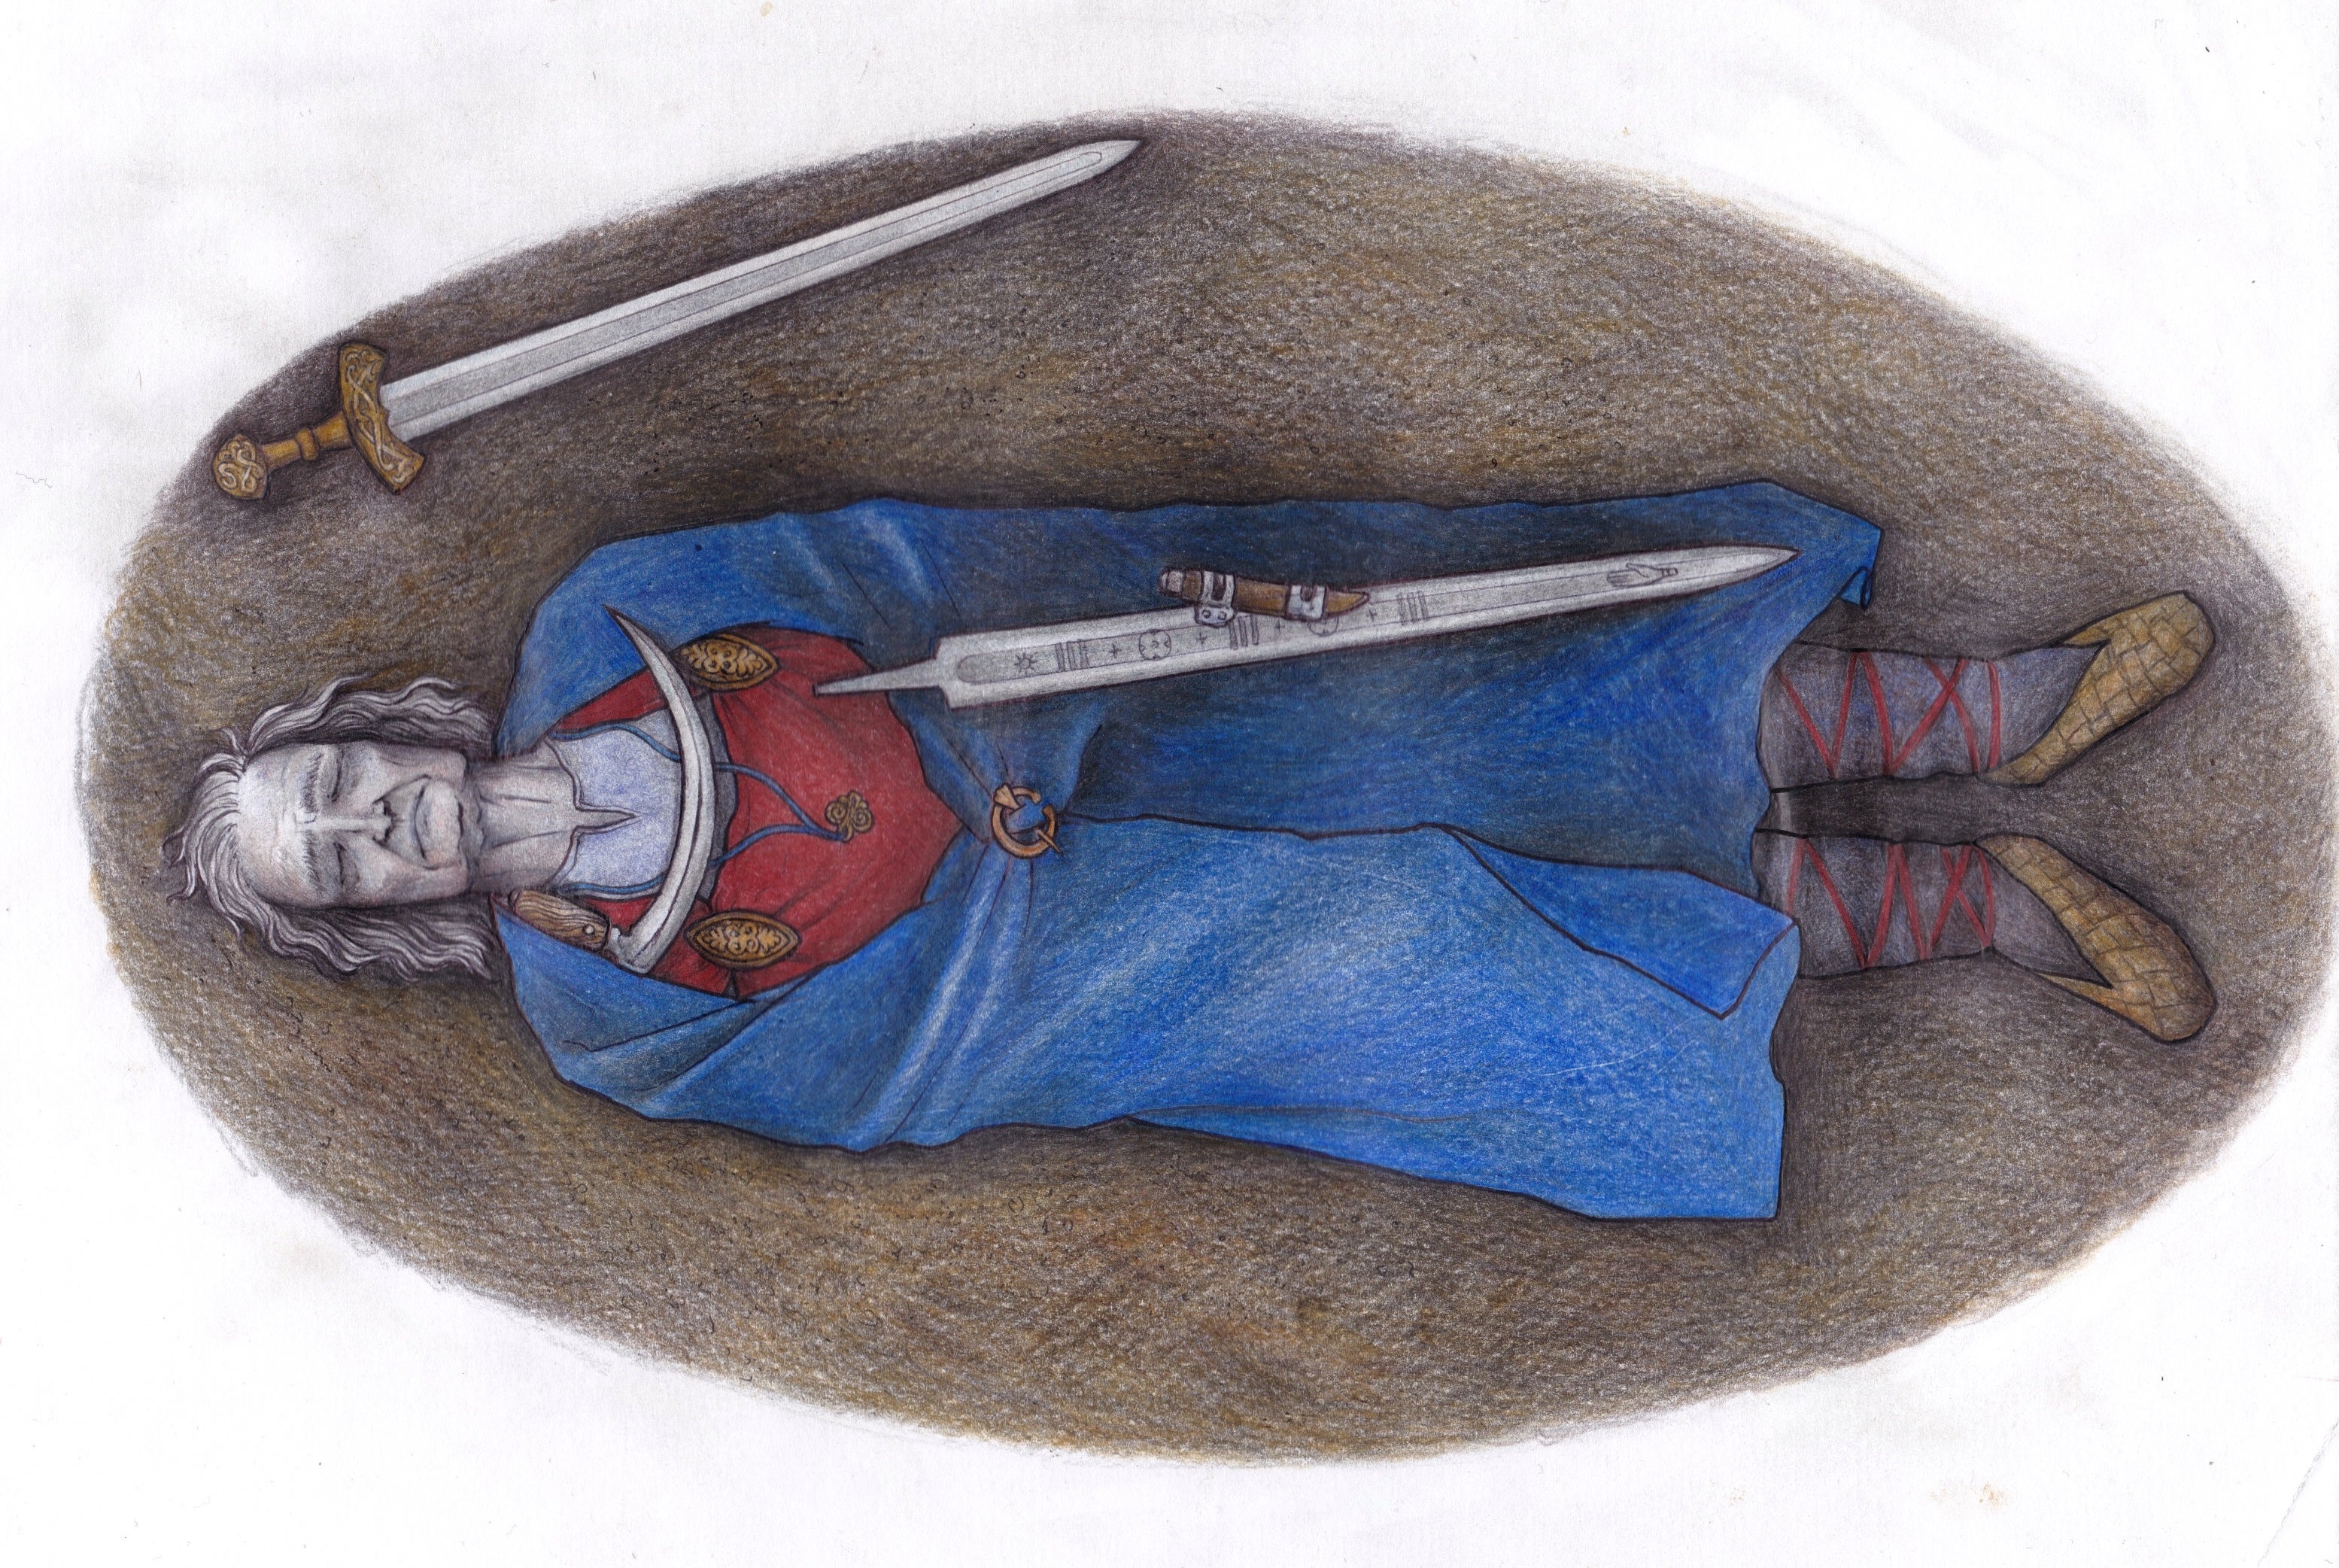 A reconstruction drawing of the Suontaka grave by Veronika Paschenko